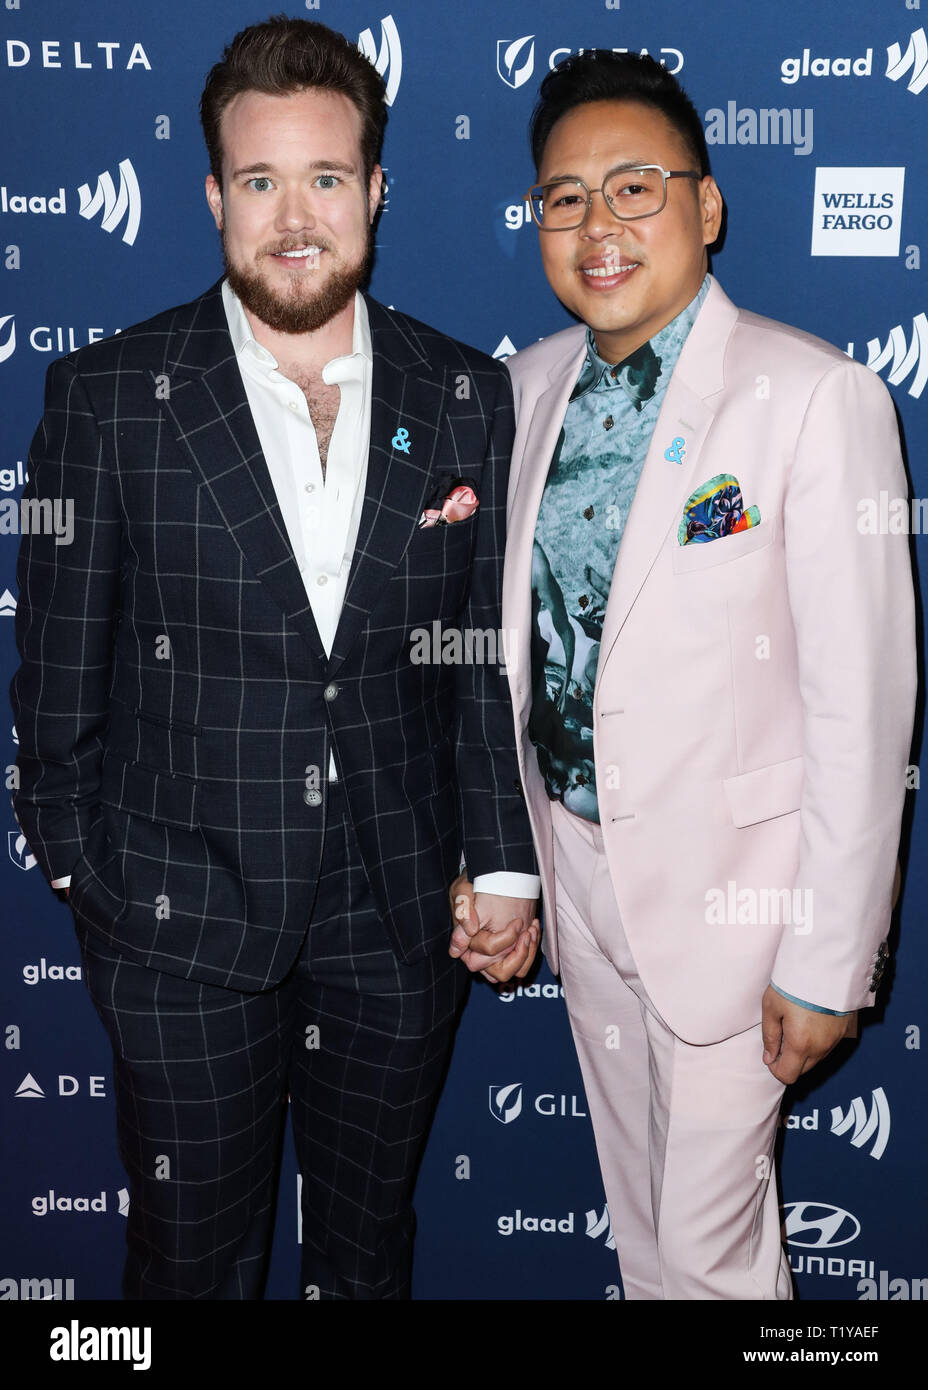 BEVERLY HILLS, LOS ANGELES, CALIFORNIA, USA - MARCH 28: Zeke Smith and Nico Santos arrive at the 30th Annual GLAAD Media Awards held at The Beverly Hilton Hotel on March 28, 2019 in Beverly Hills, Los Angeles, California, United States. (Photo by Xavier Collin/Image Press Agency) Stock Photo